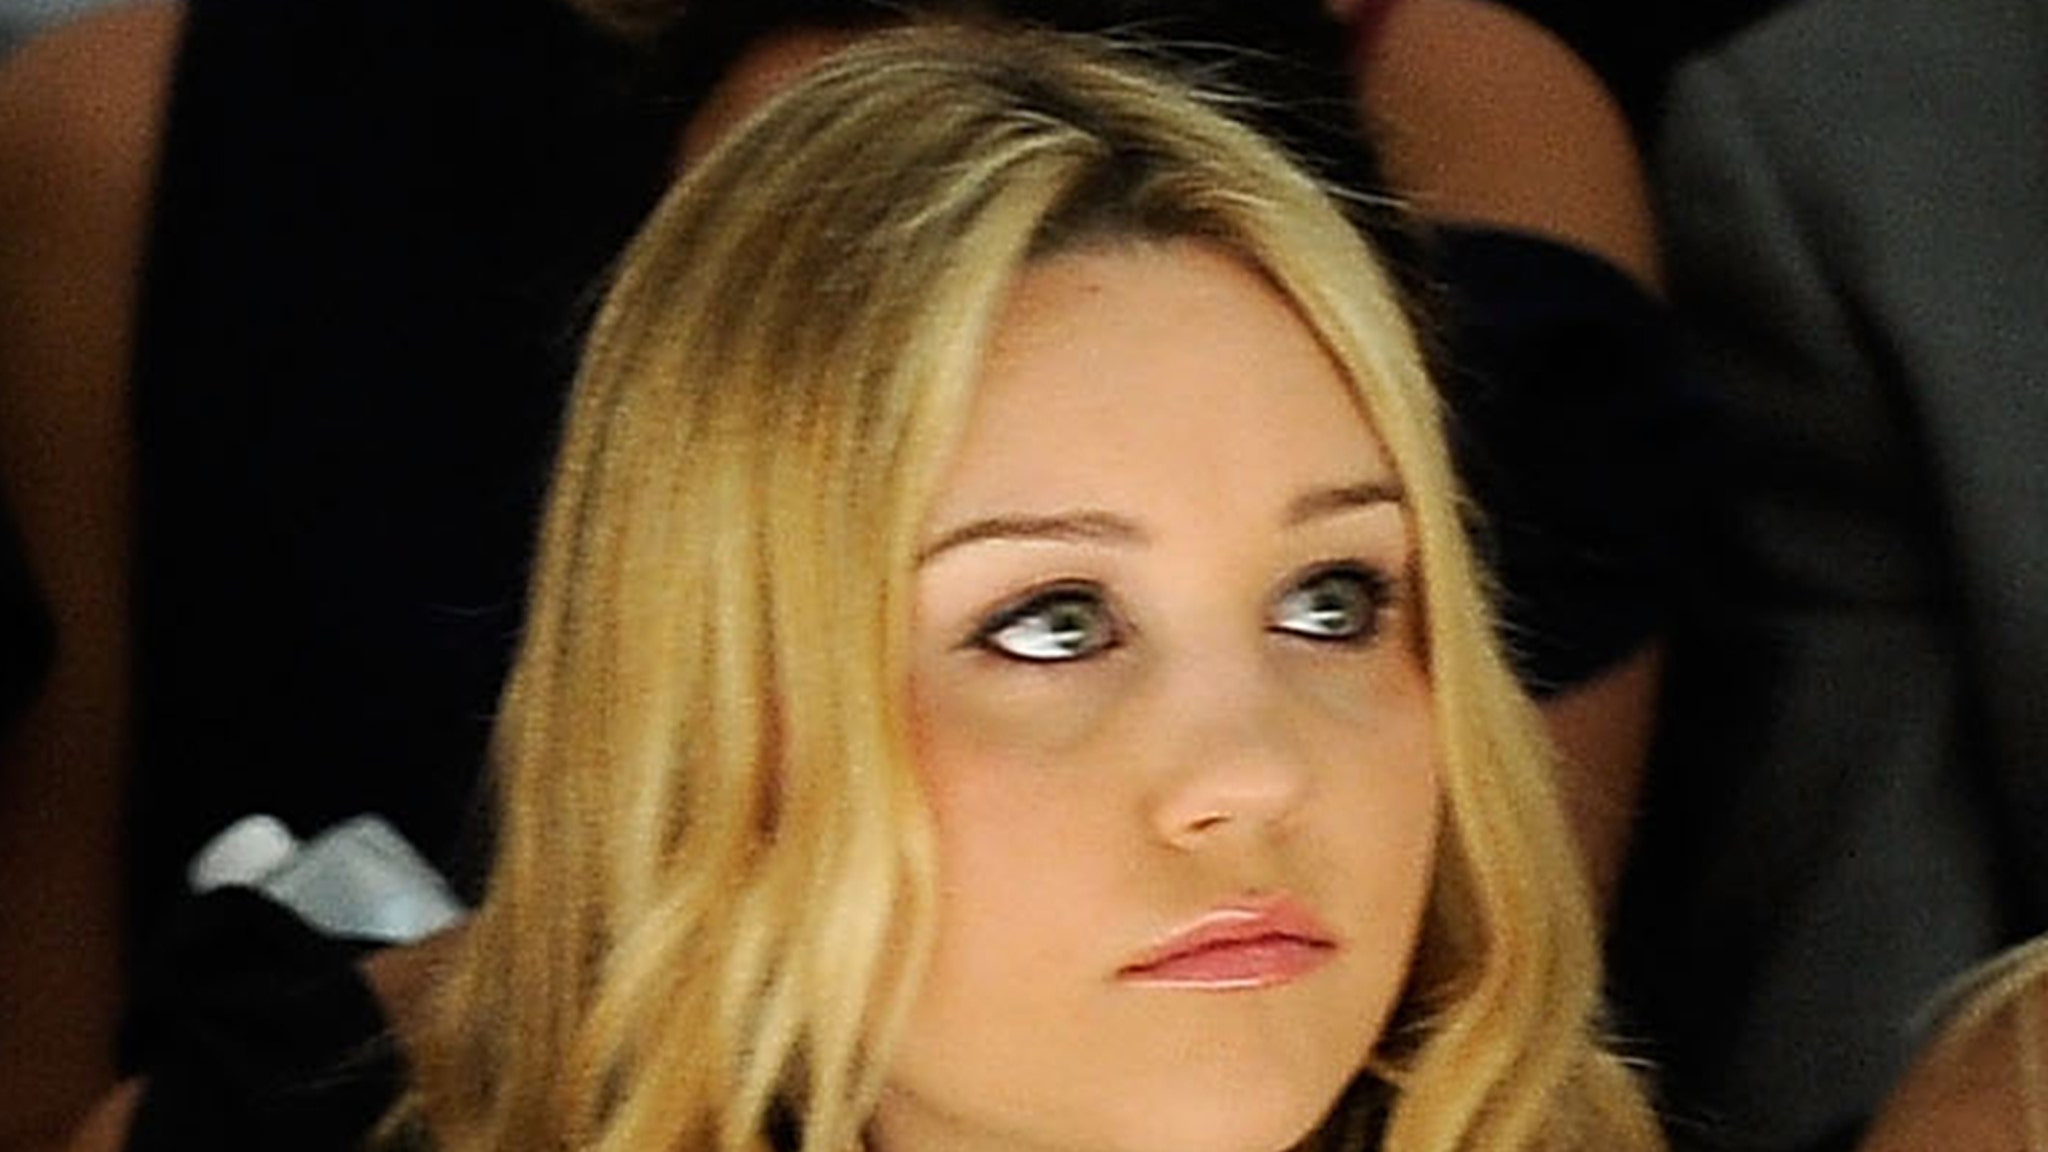 Amanda Bynes detained for mental health assessment amid ongoing struggles